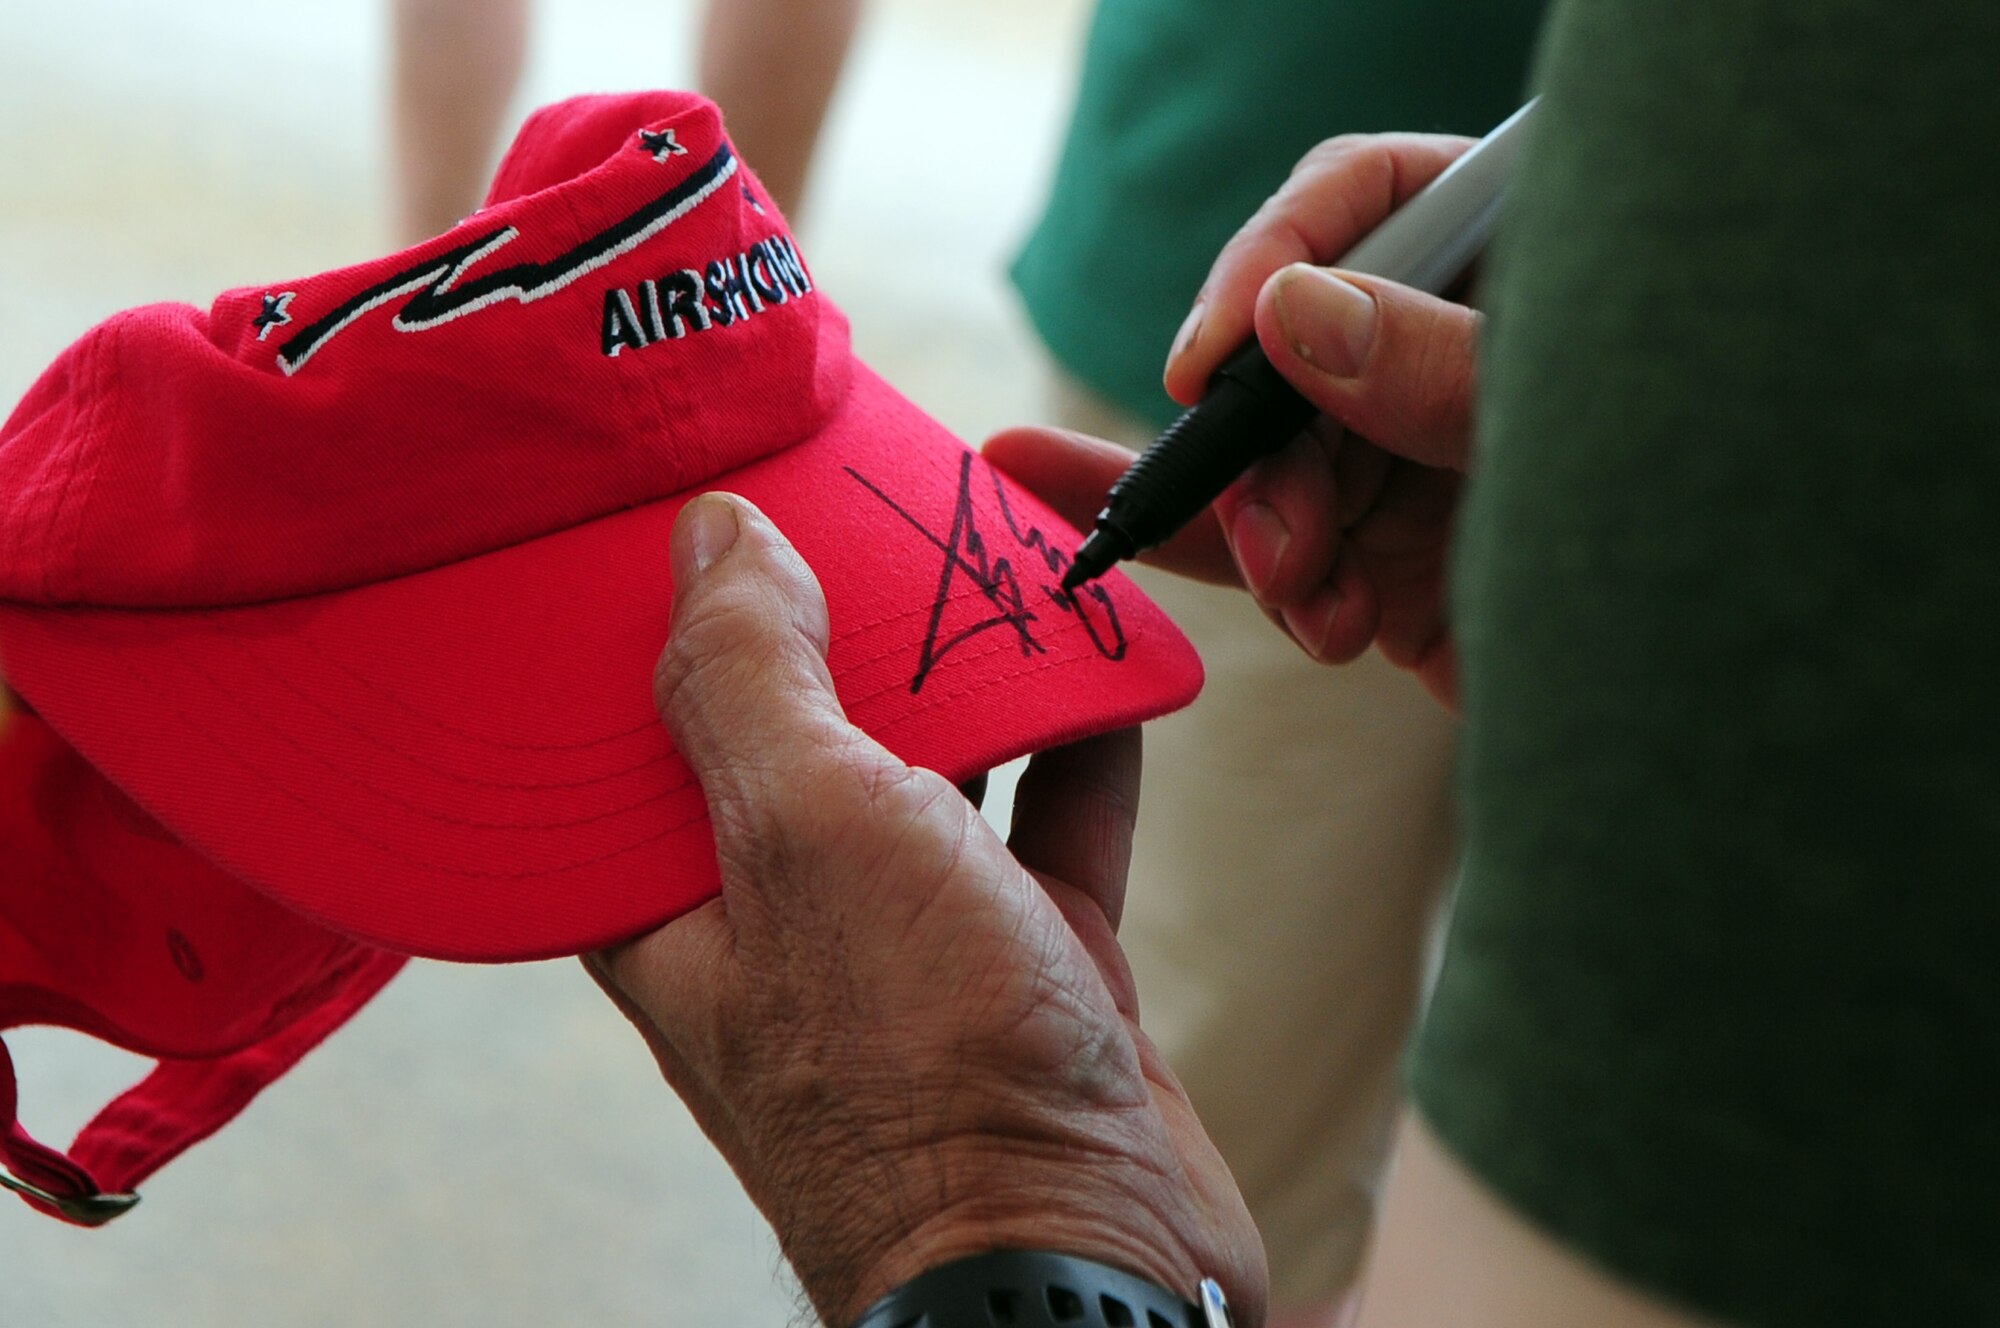 BARKSDALE AIR FORCE BASE, La. - Country music recording artist Aaaron Tippen autographs a Barksdale Air Show hat prior to his performance on the final day of the Defenders of Liberty Air Show, May 10. More than 1,000 air show spectators waited through inclement weather to see Aaron perform on Mother's Day. (U.S. Air Force photo by Senior Airman Joanna M. Kresge)(Released)